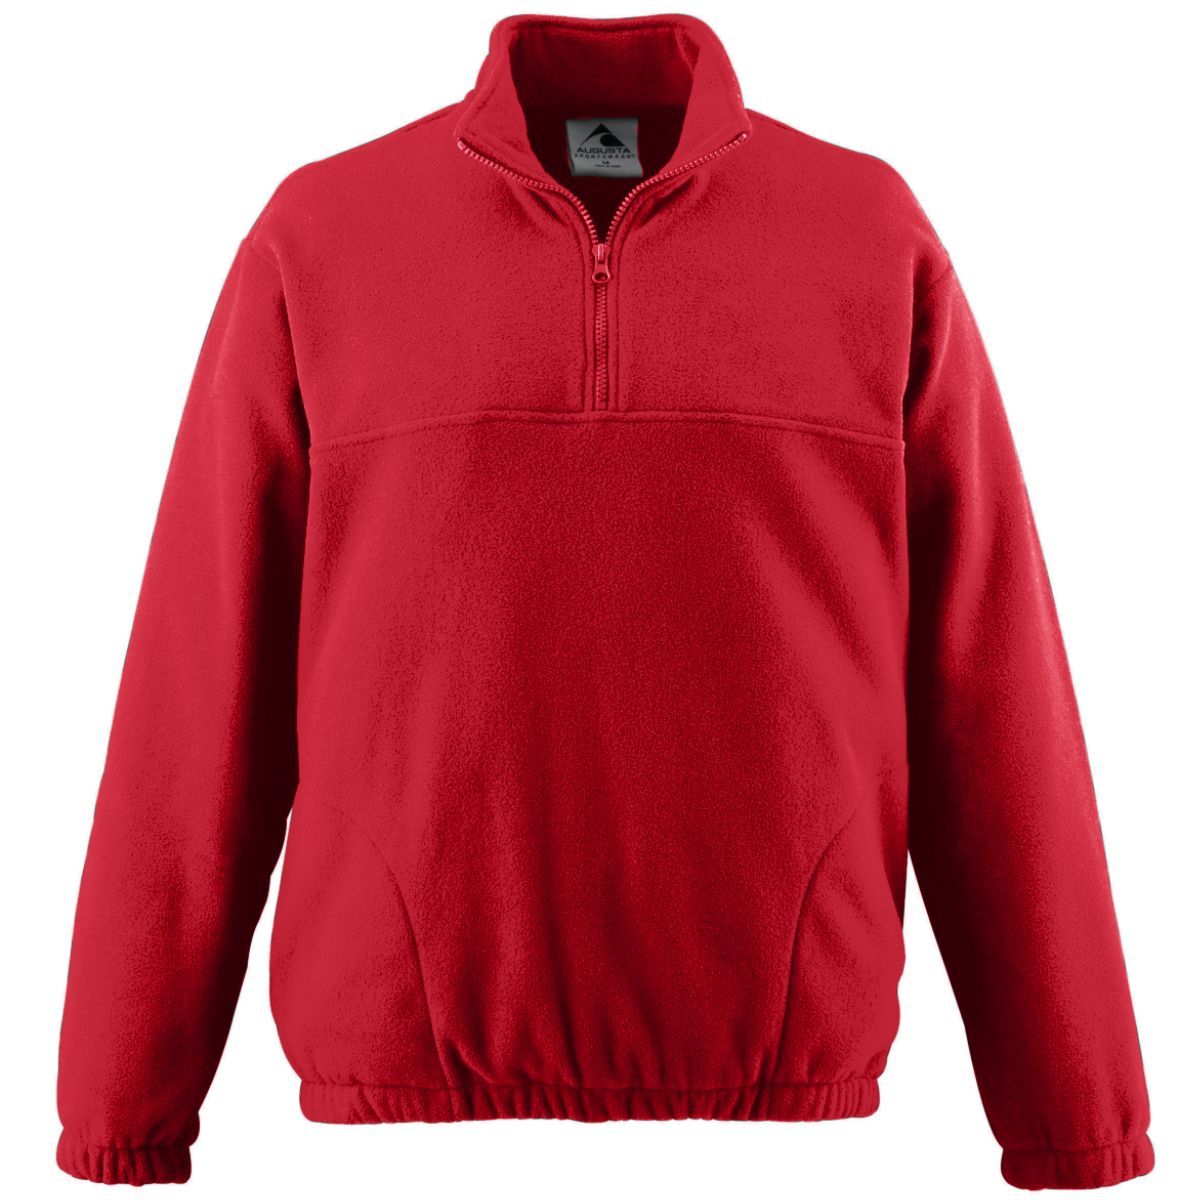 Augusta Sportswear Chill Fleece Half-Zip Pullover in Red  -Part of the Adult, Adult-Pullover, Augusta-Products, Outerwear product lines at KanaleyCreations.com